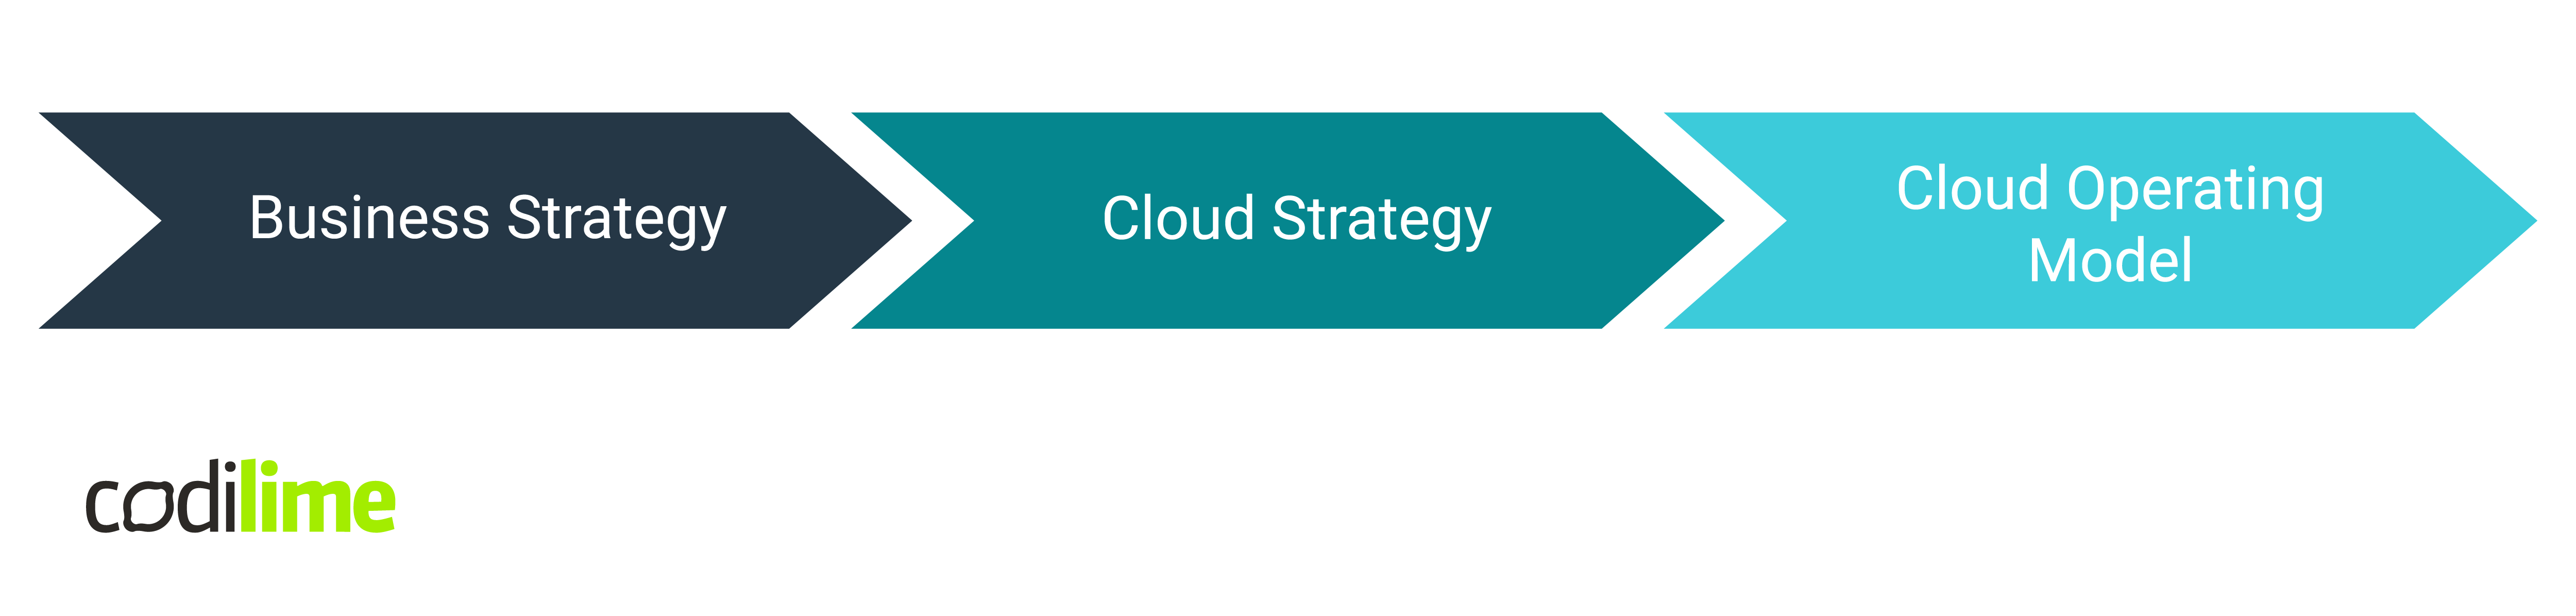 From business strategy to cloud operating model 